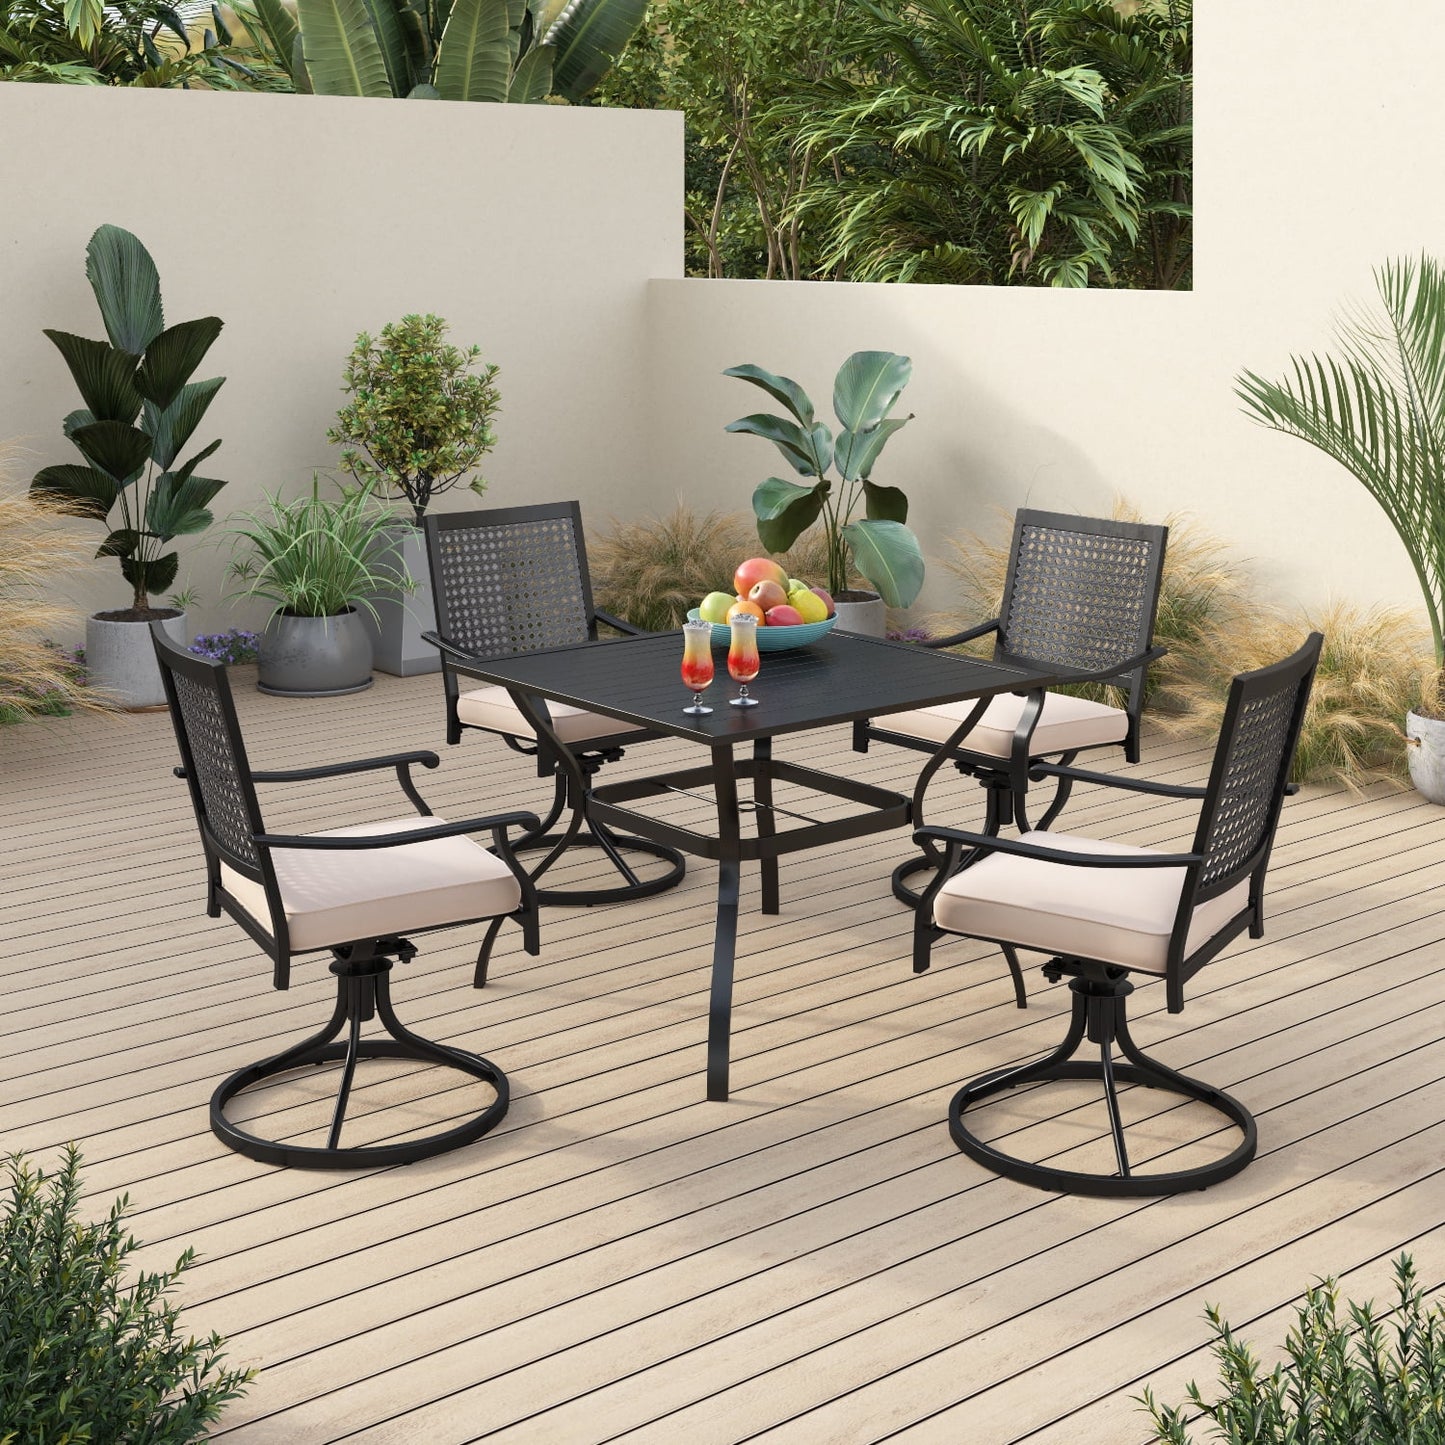 Sophia & William 5 Pcs Patio Dining Set 4 Outdoor Cushioned Swivel Chairs & 37 Square Metal Dining Table